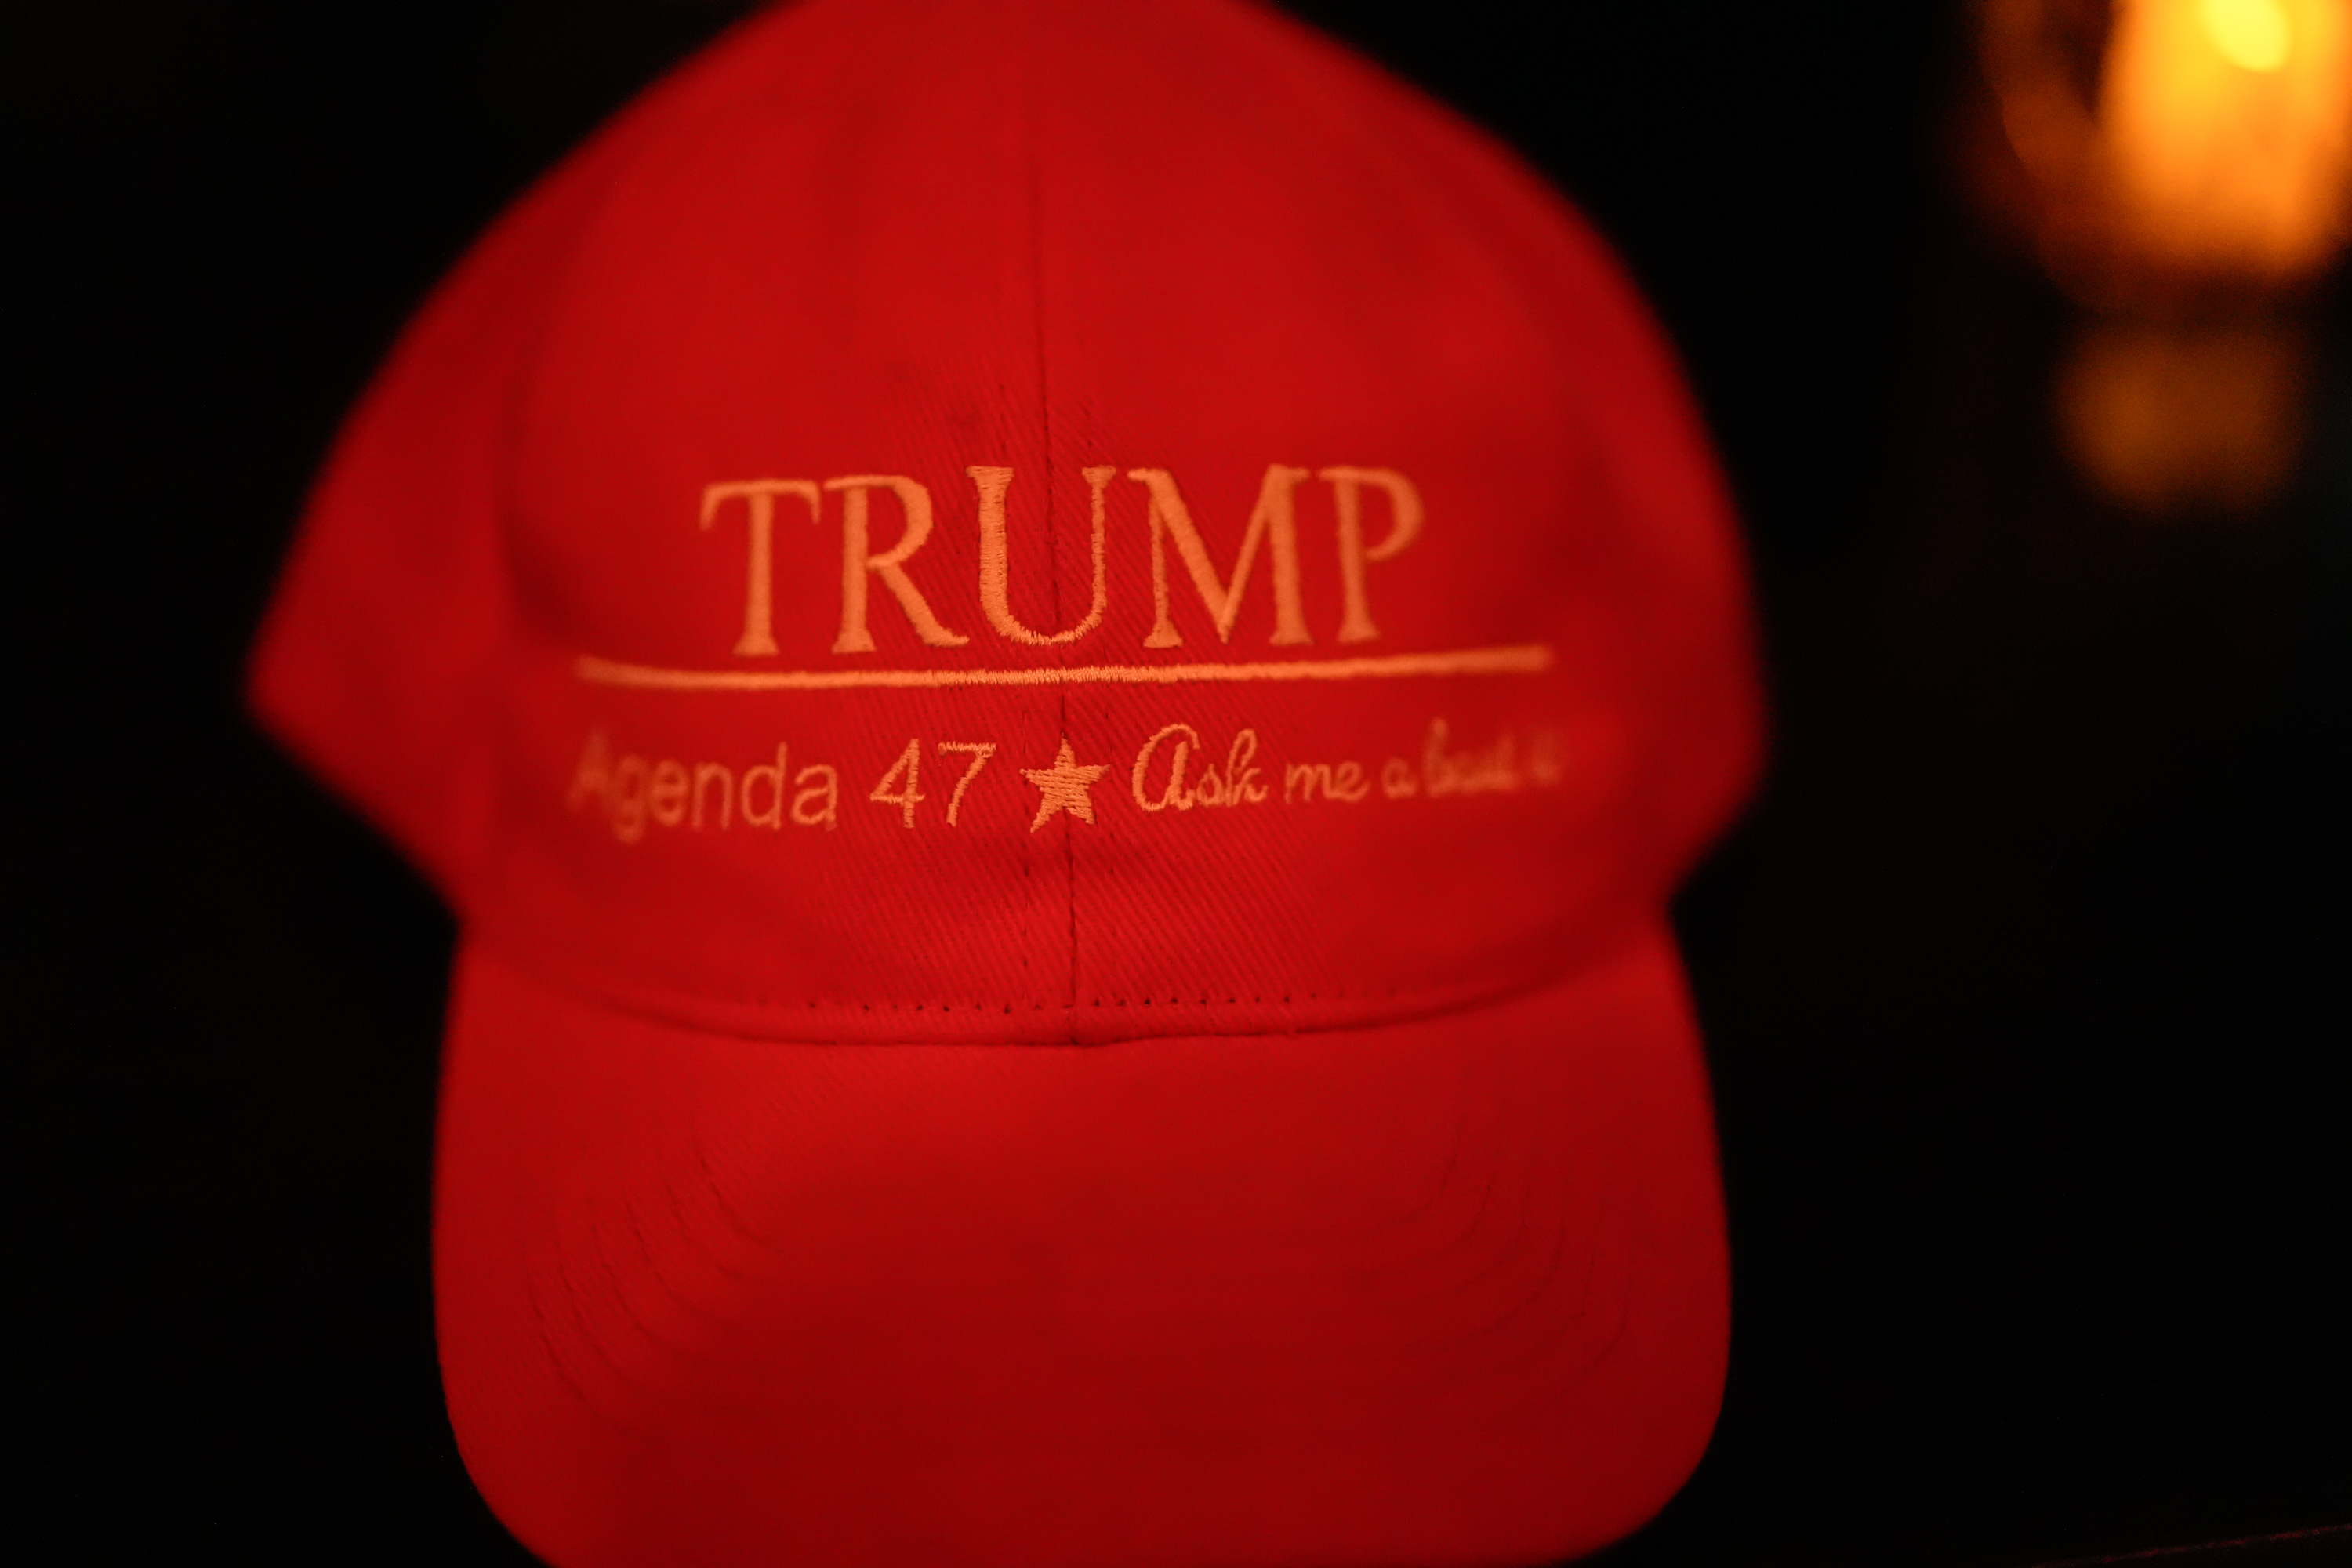 The image shows a red baseball cap with &quot;TRUMP&quot; in large letters and &quot;Agenda 47 - Ask me about it&quot; underneath. The background is dark.